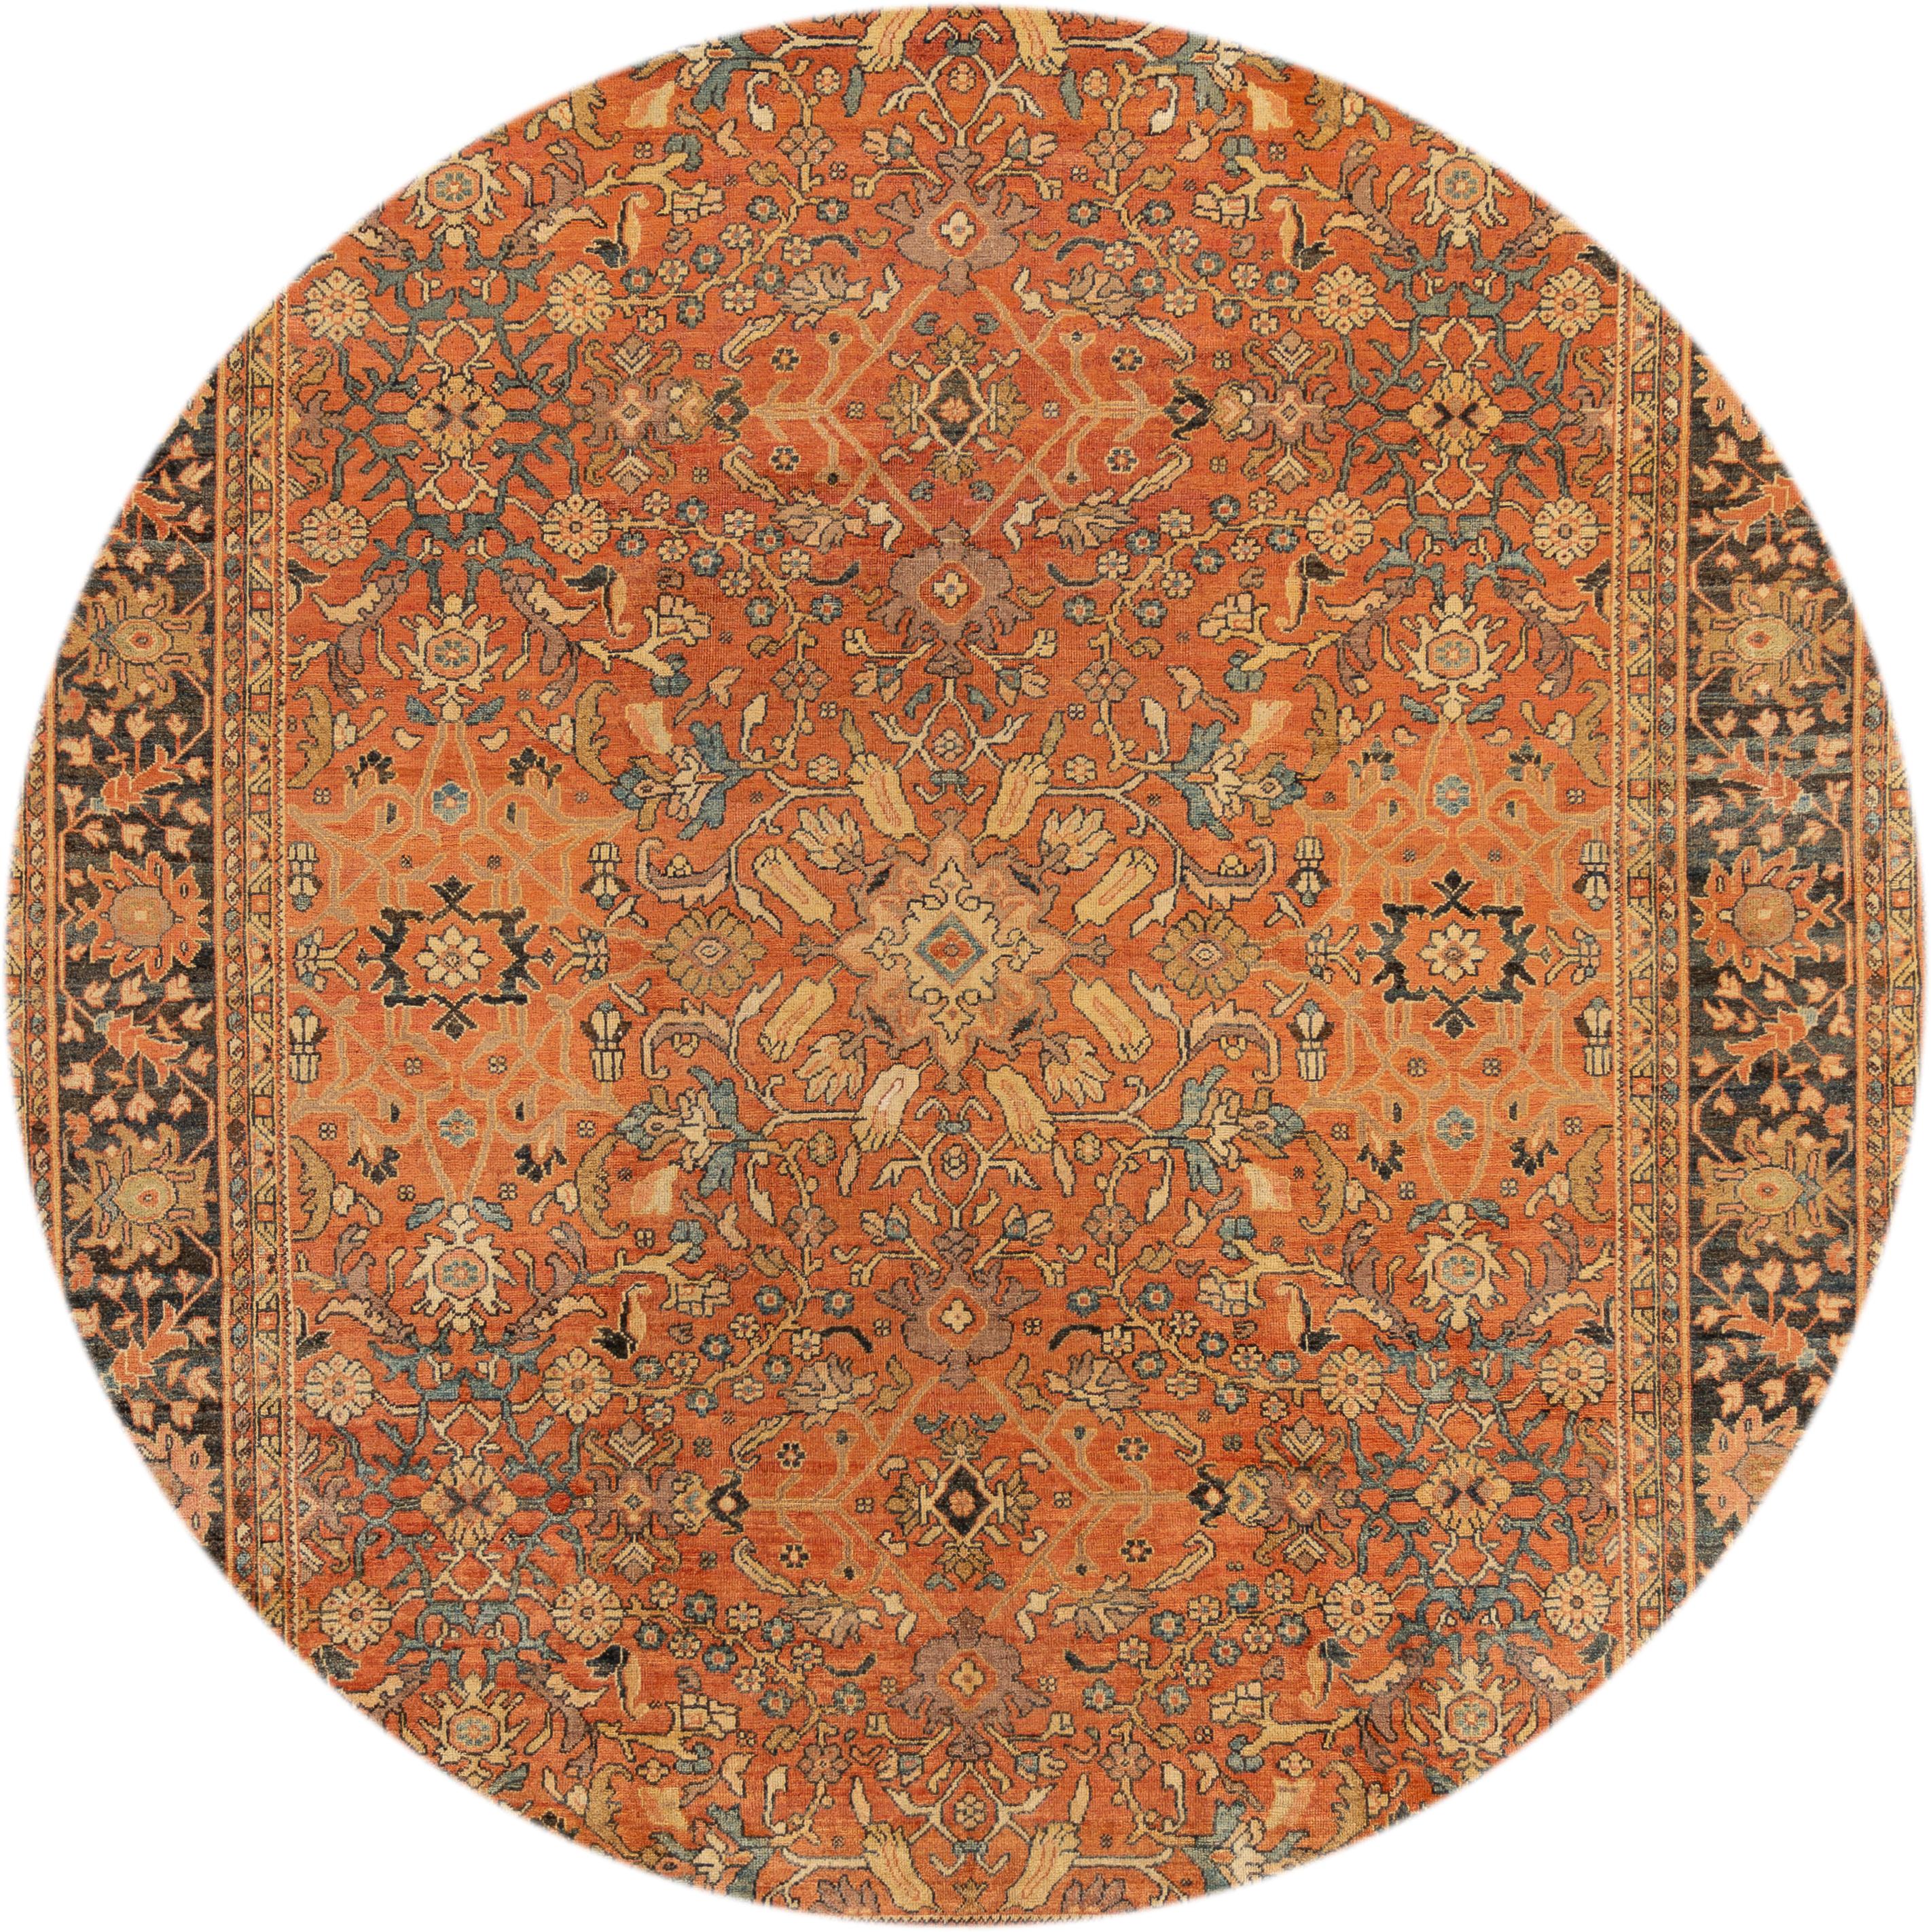 Beautiful antique Persian Mahal rug, hand knotted wool with a rusty orange field, blue and tan accents in an all-over Classic motif,
circa 1920
This rug measures 9' 3